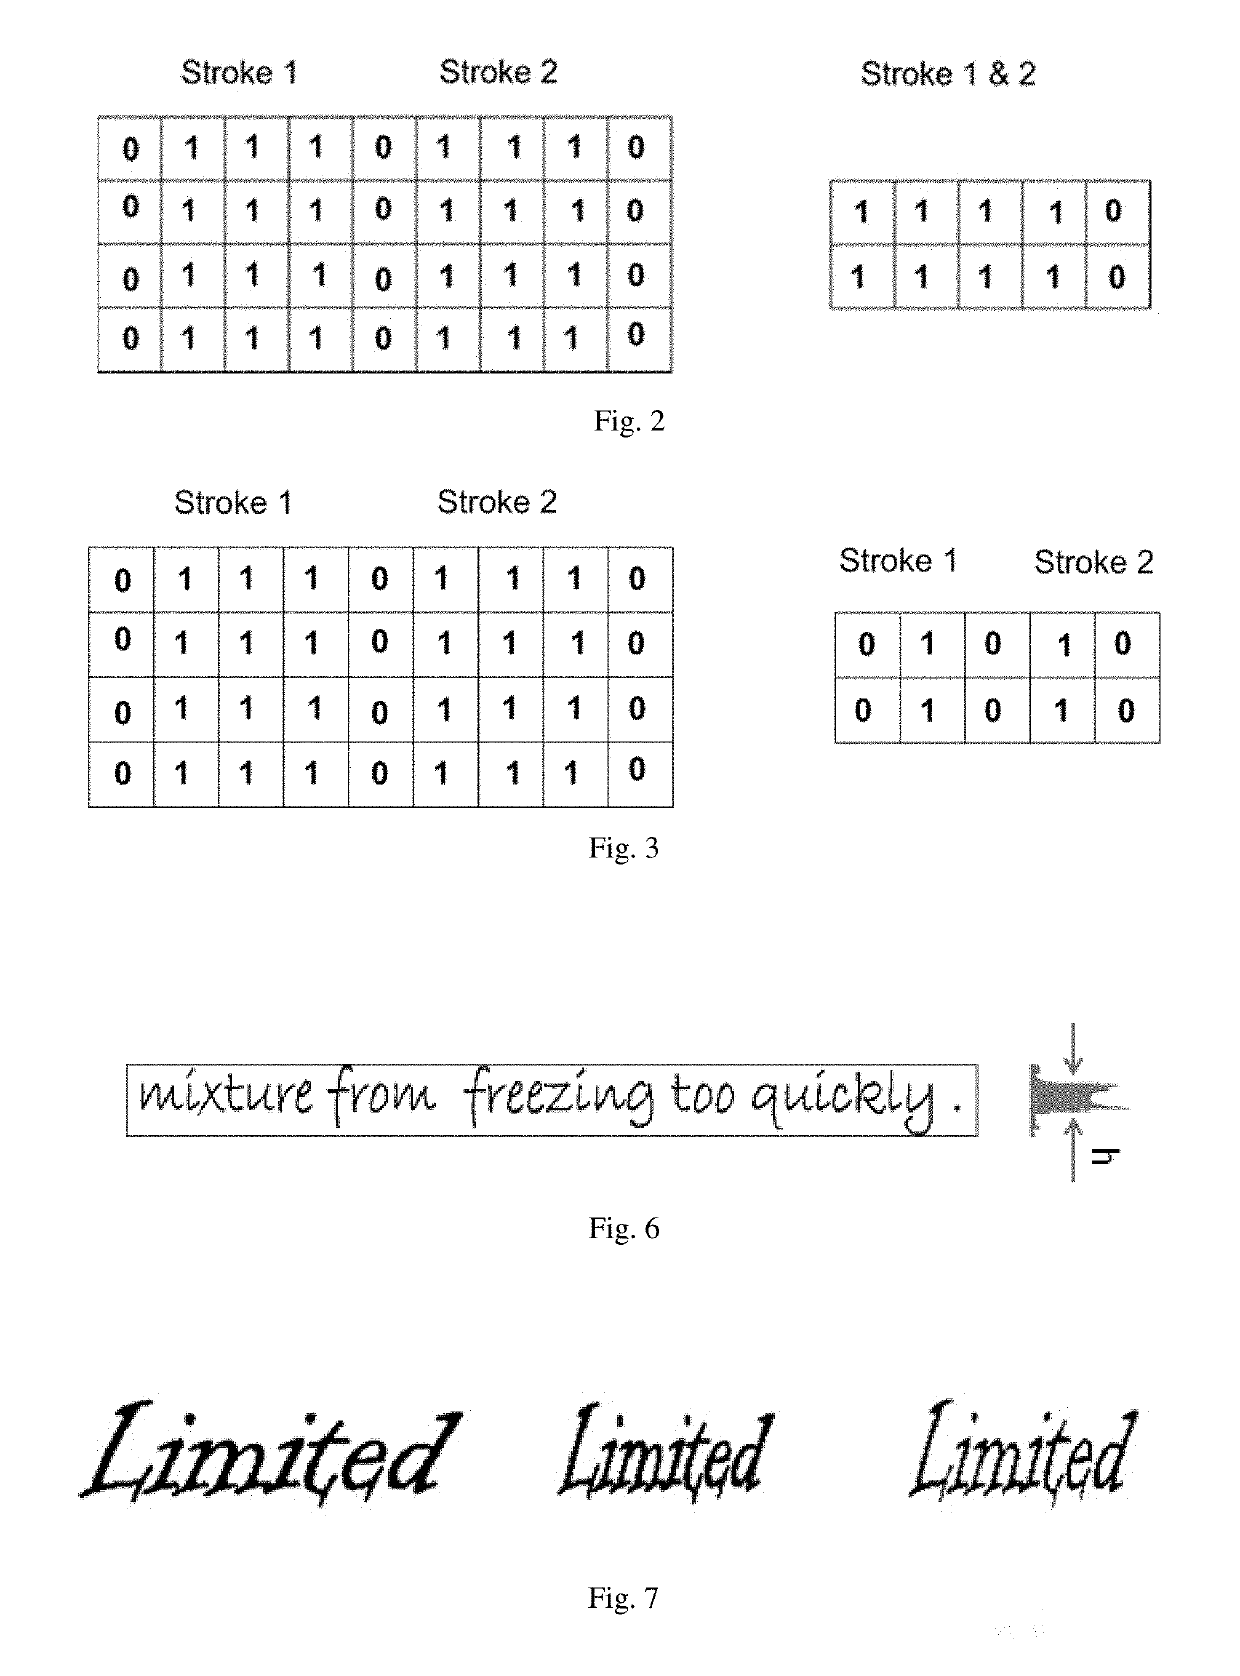 Text image processing using stroke-aware max-min pooling for OCR system employing artificial neural network